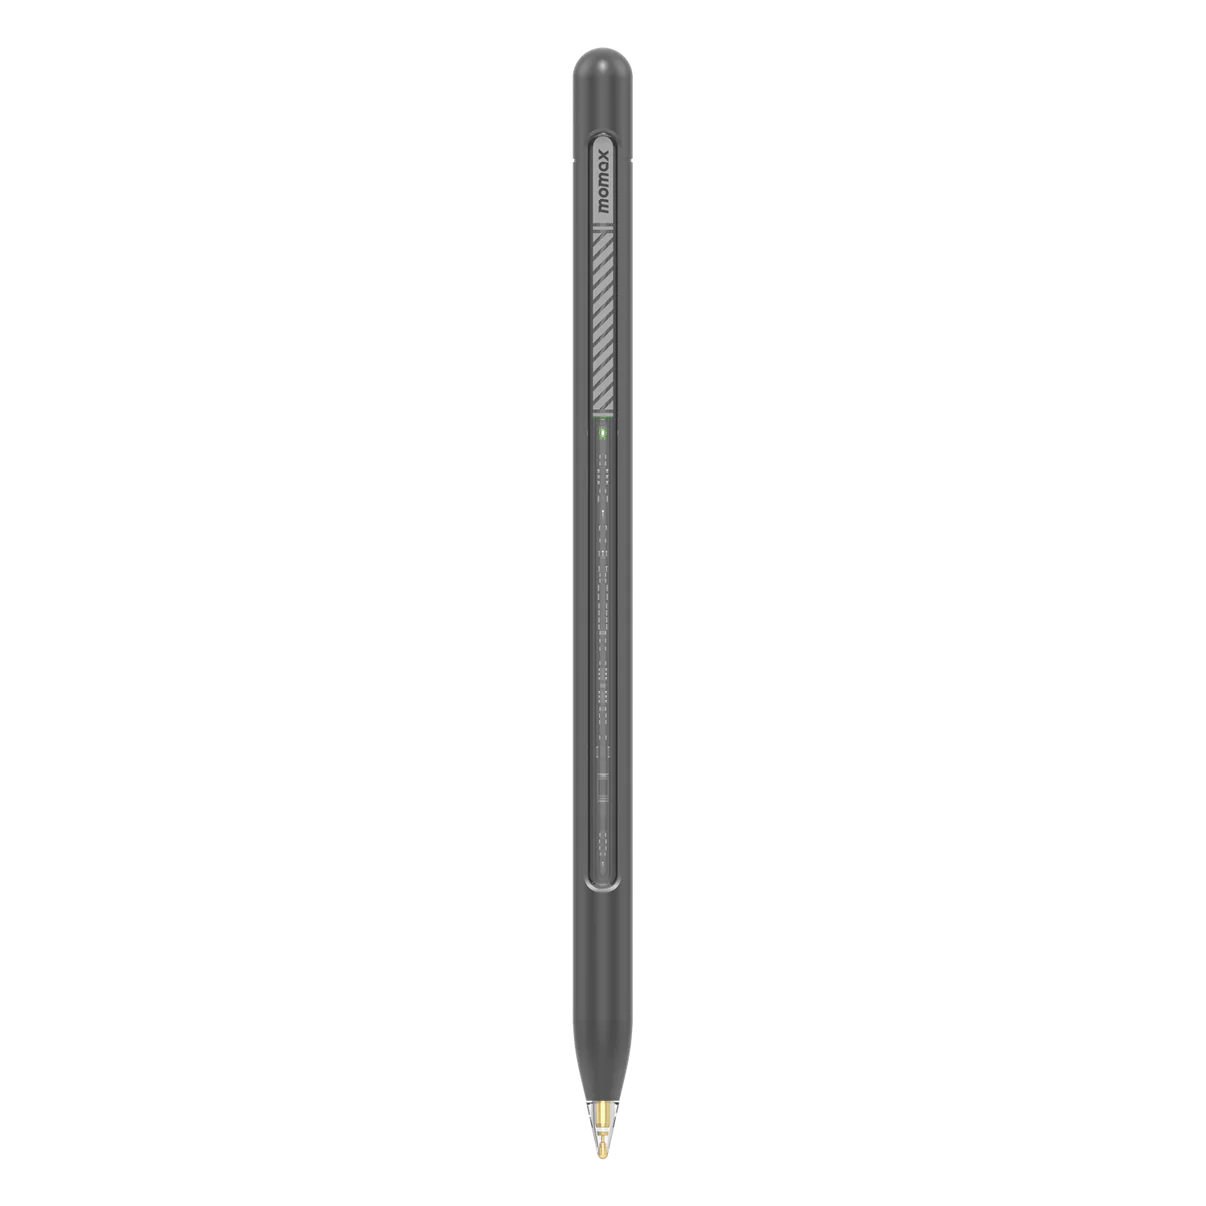 MOMAX MAG LINK PRO MAGNETIC CHARGING ACTIVE STYLUS PEN